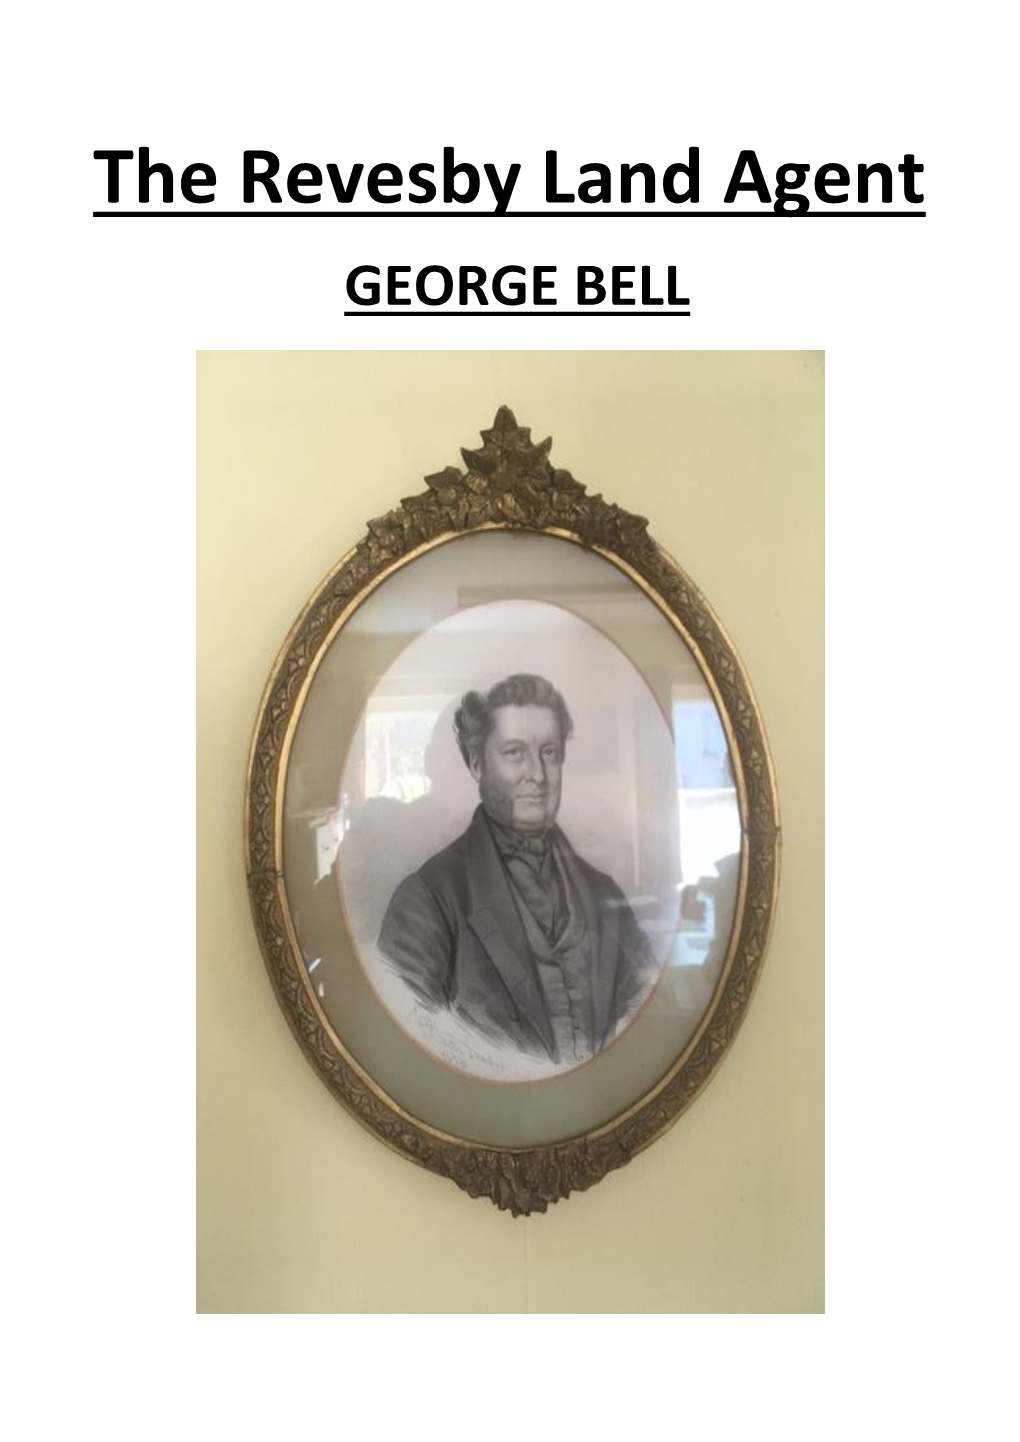 The Revesby Land Agent GEORGE BELL